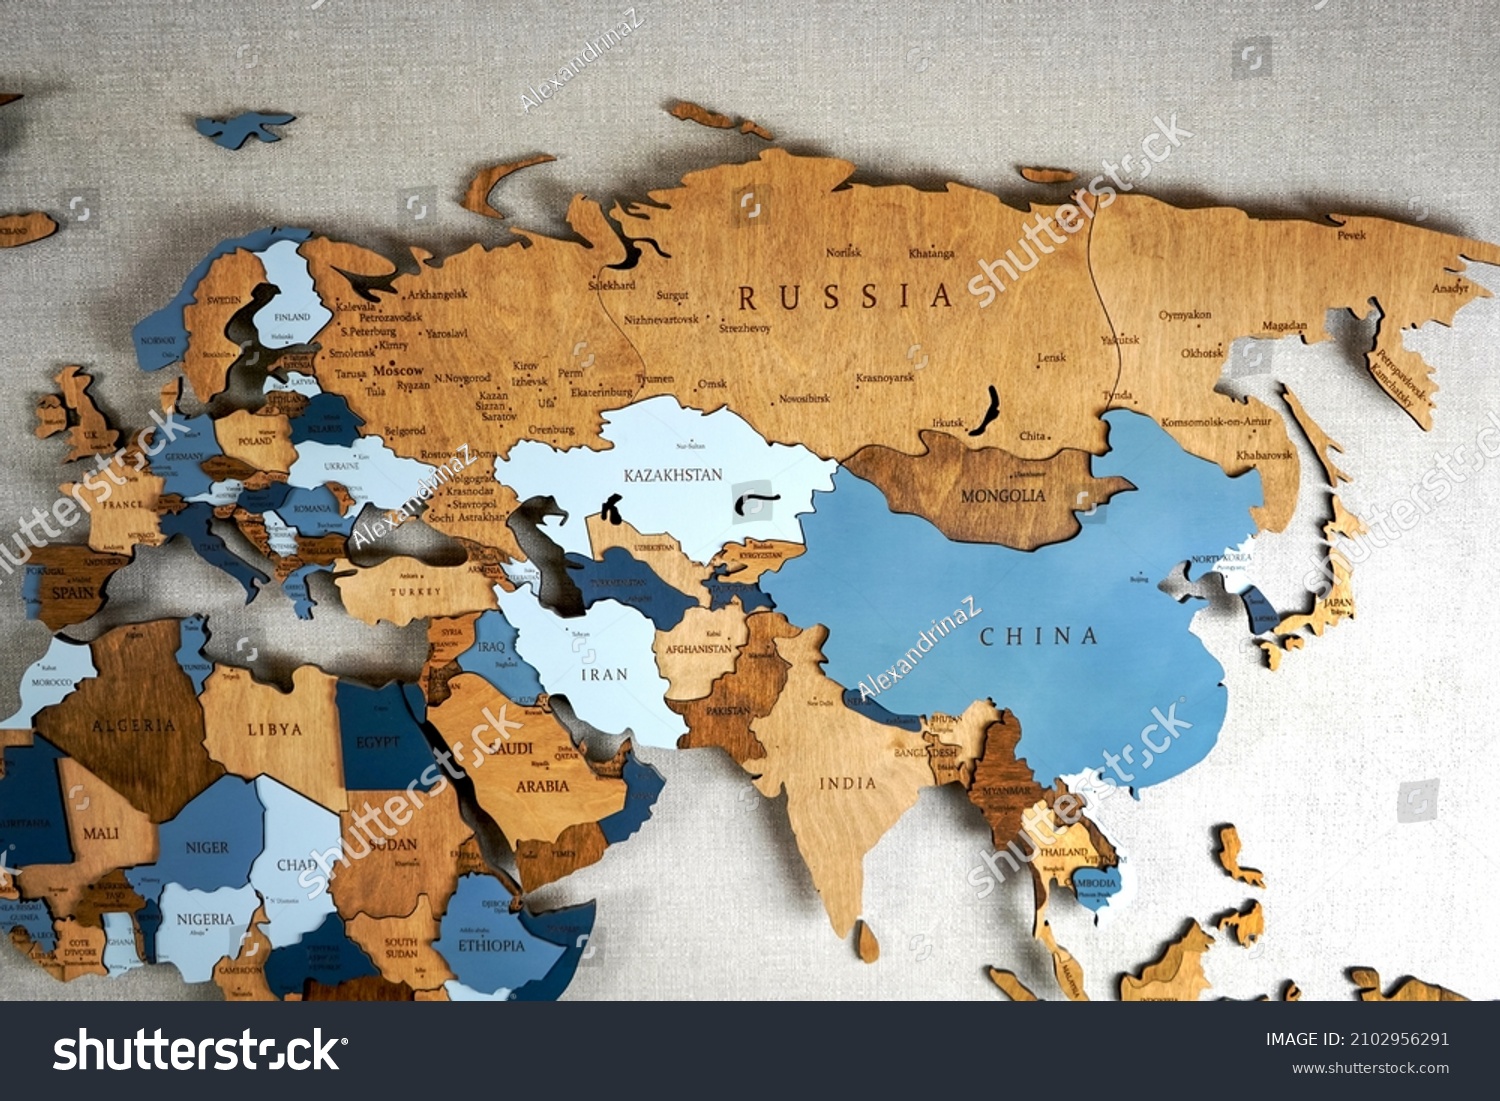 Continent Eurasia on the political map. Wooden world map on the wall.  #2102956291